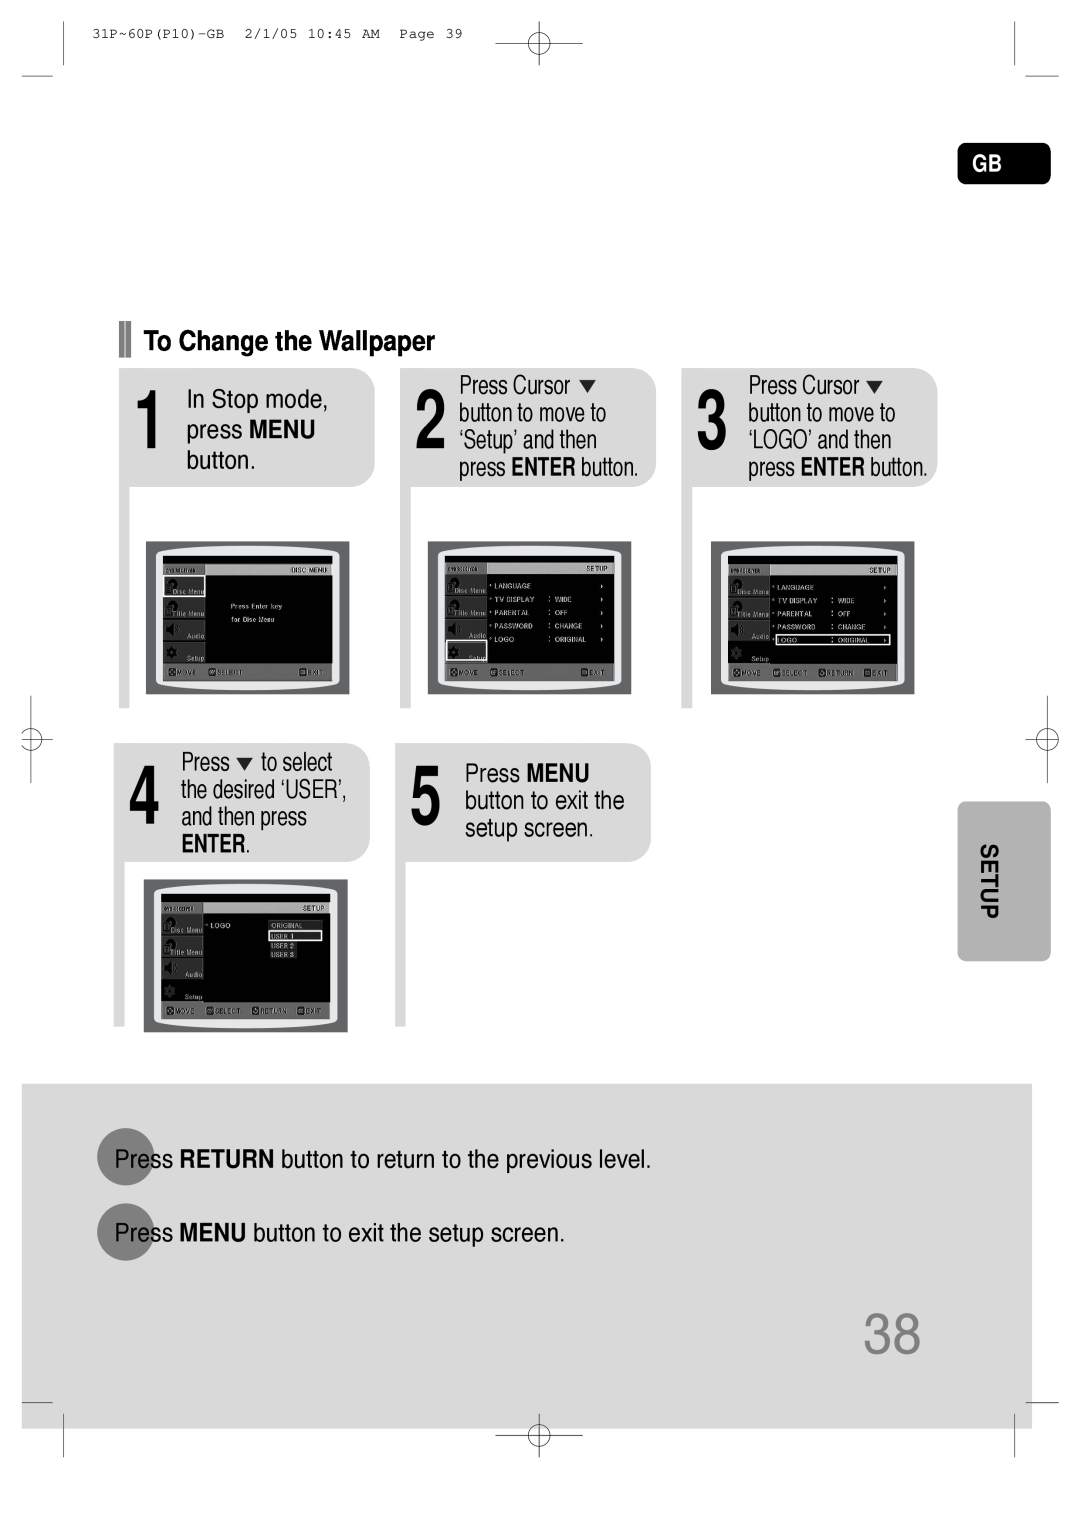 Samsung P10 instruction manual To Change the Wallpaper, Enter 